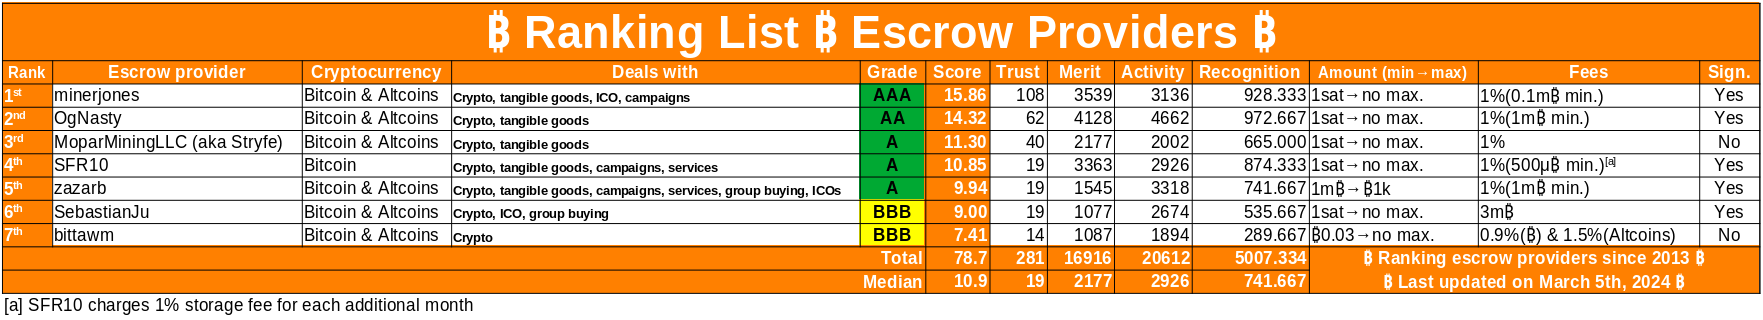 If Ranking List - Escrow Providers Image with stats does not load - RIGHT CLICK, REFRESH or Press F5